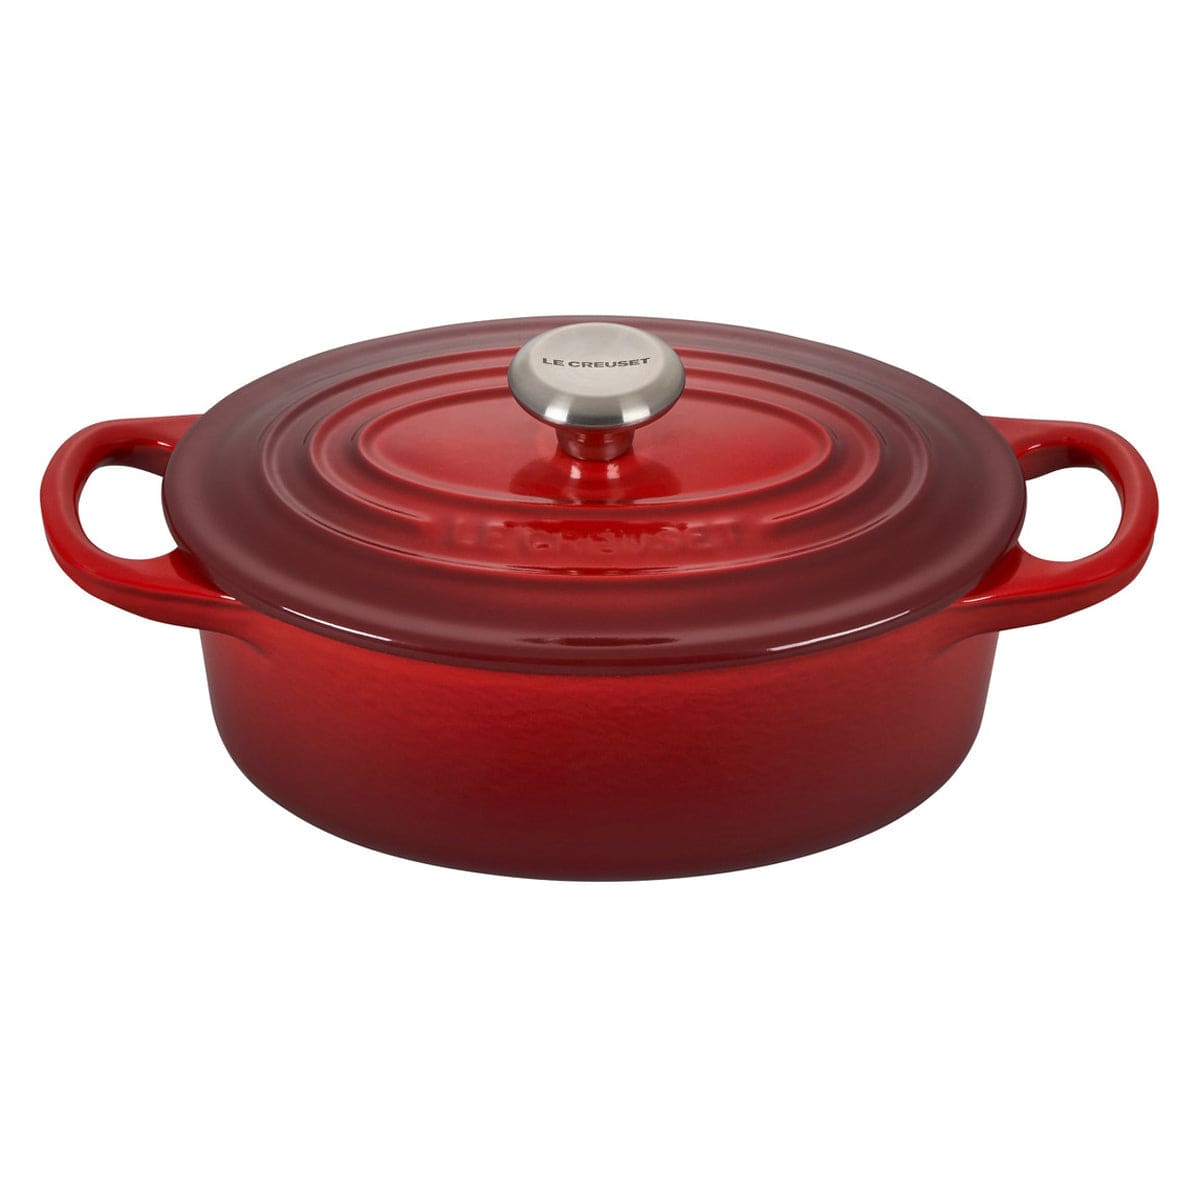 Le Creuset Enameled Cast-Iron 9-Quart Round French Oven, Red